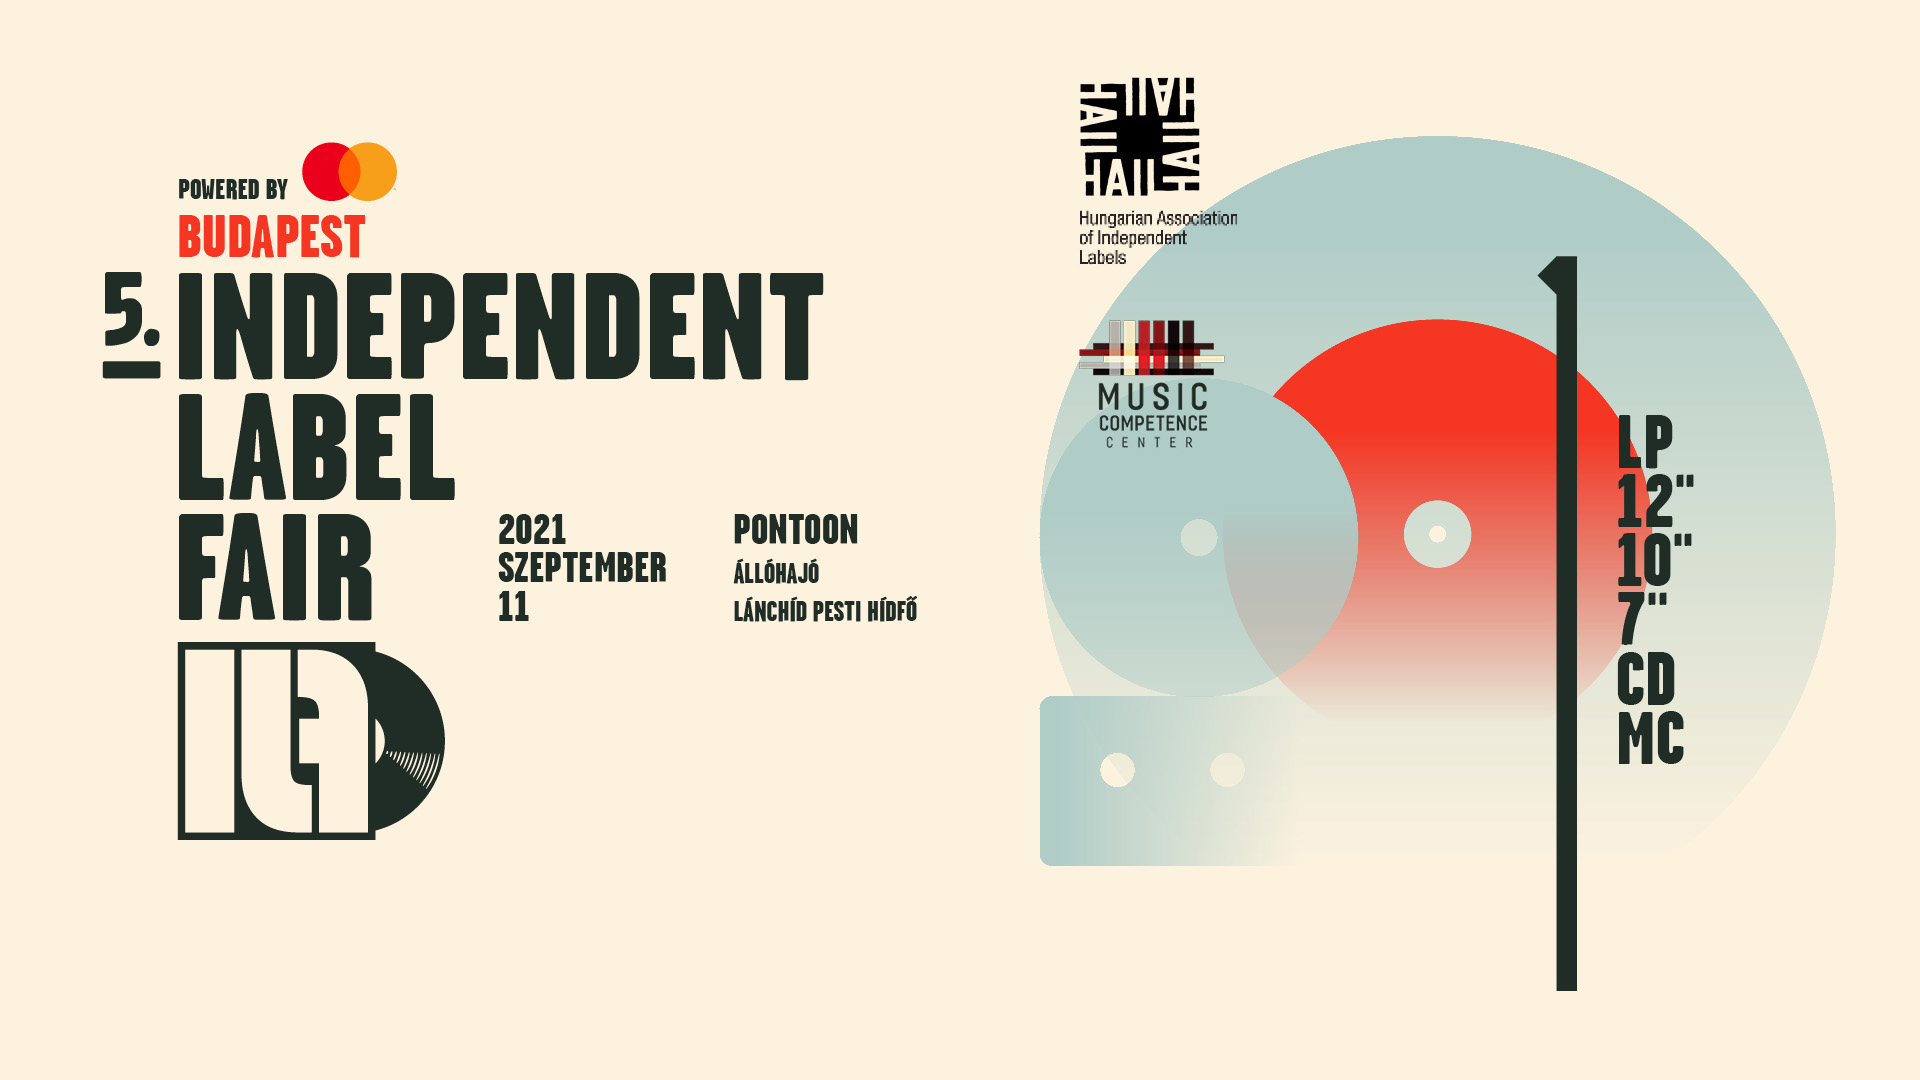 GR1993 Records will go to the Independent Label Fair